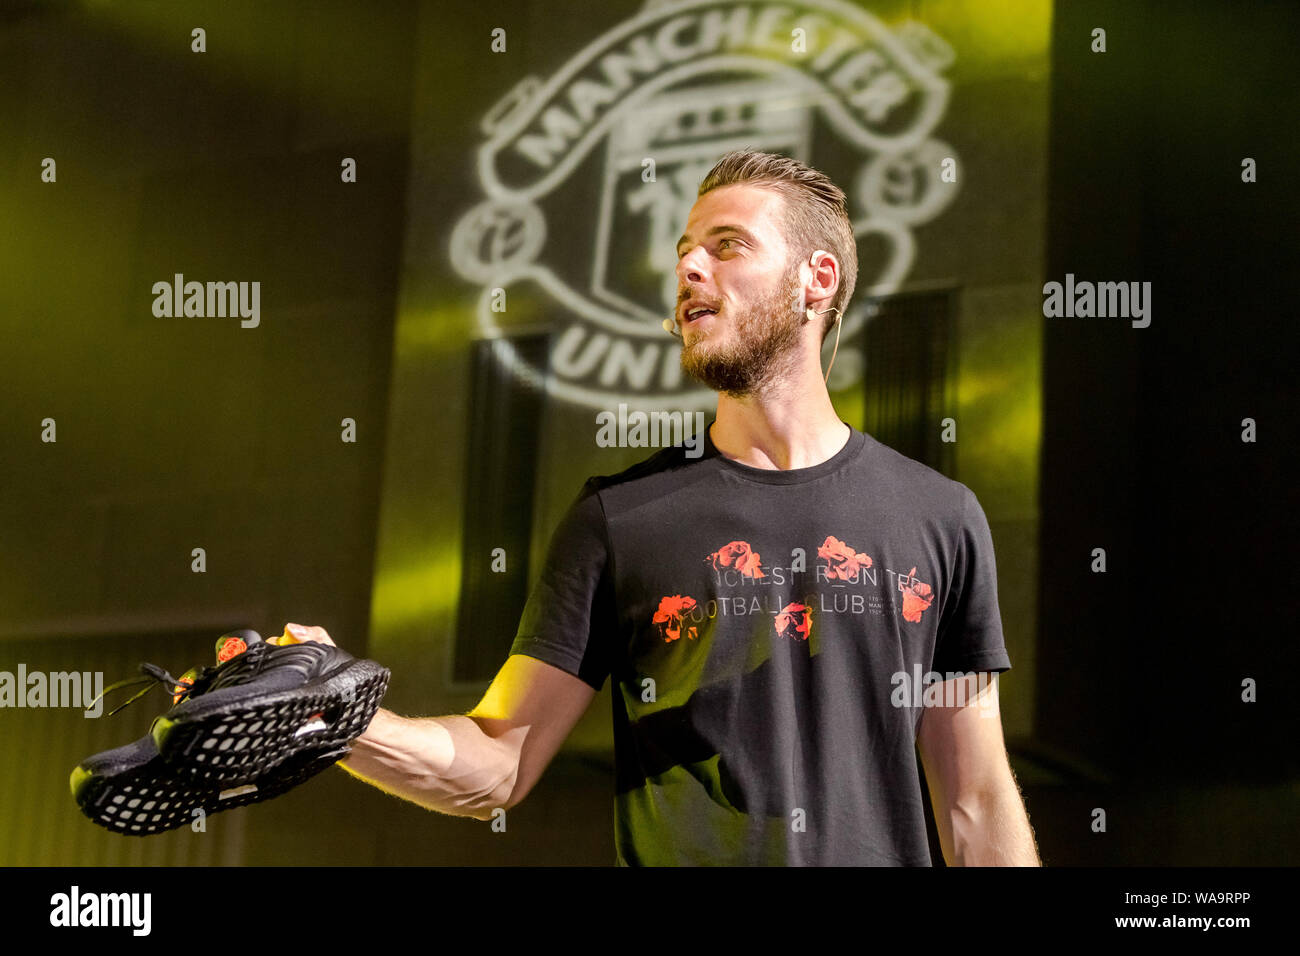 Spanish football player David de Gea of Manchester United F.C. of Premier  League attends a promotional event for adidas during 2019 pre-season tour  in Stock Photo - Alamy